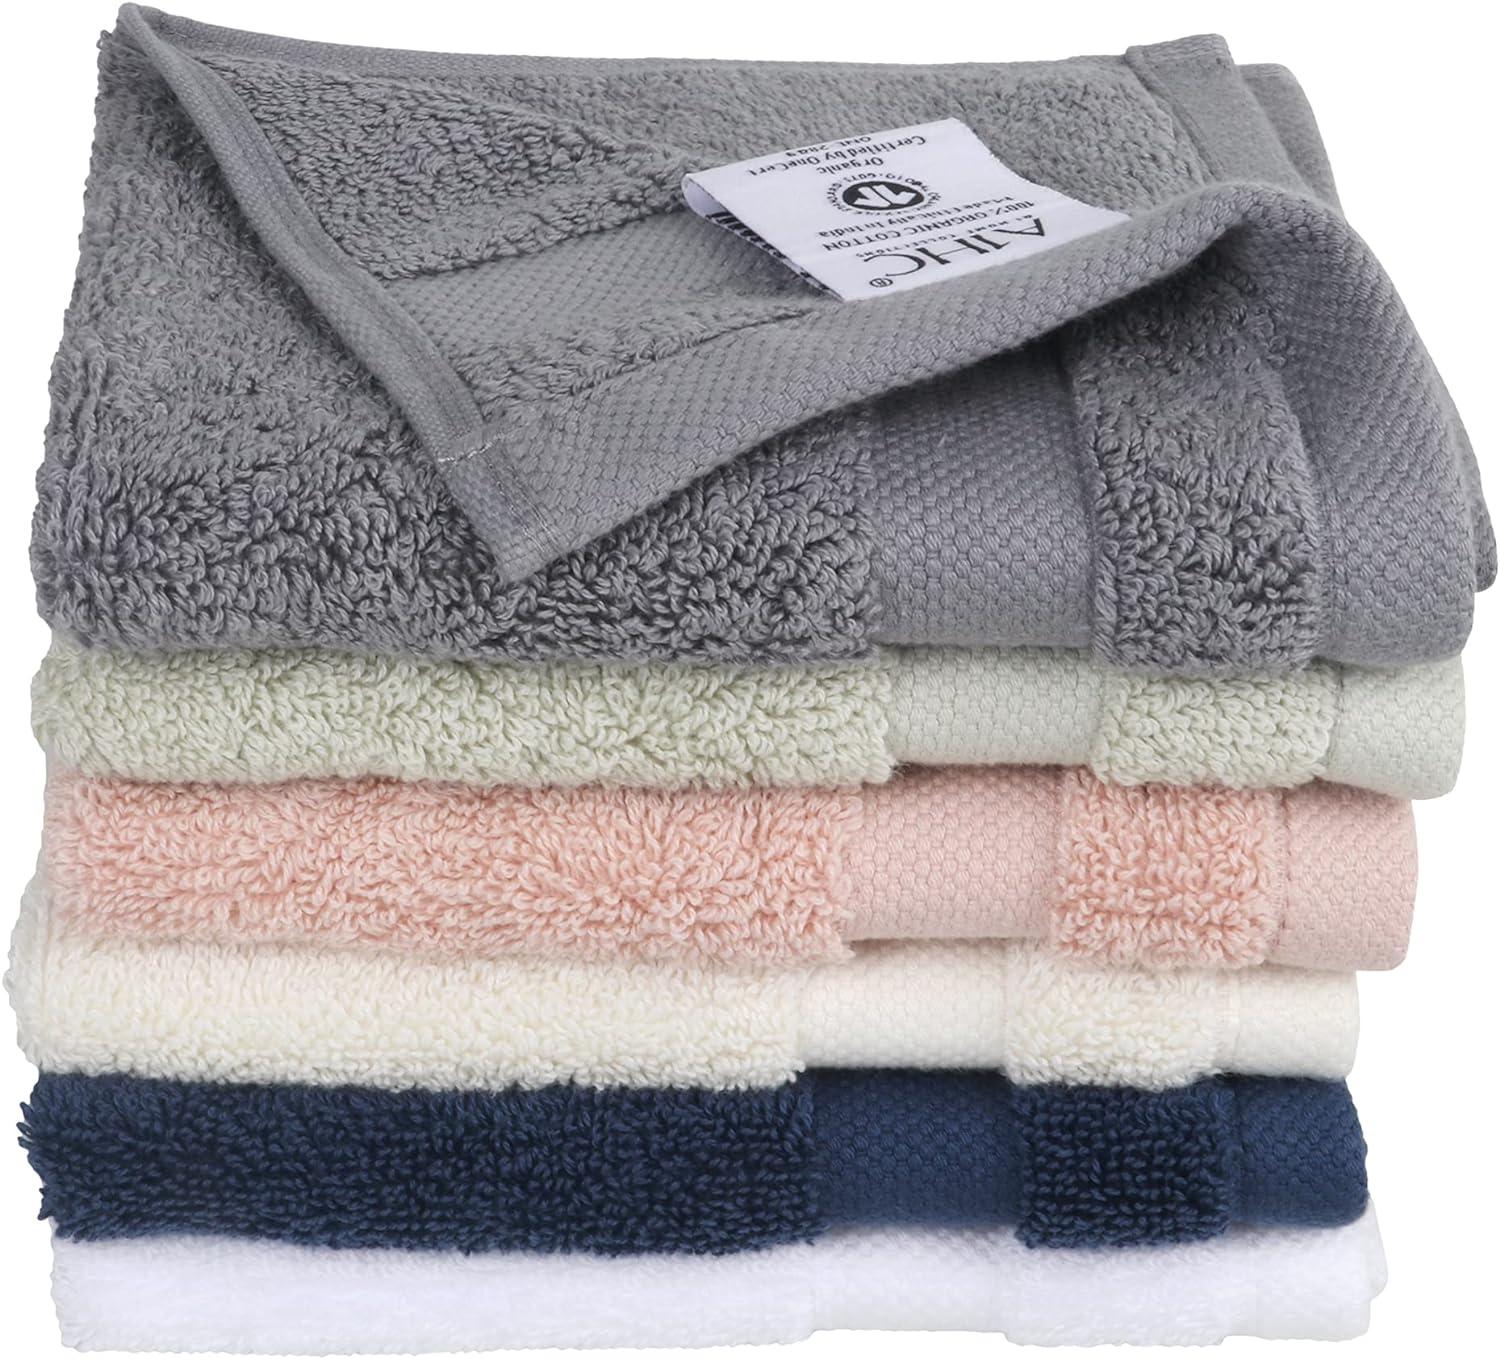 Certified Organic Cotton Towels